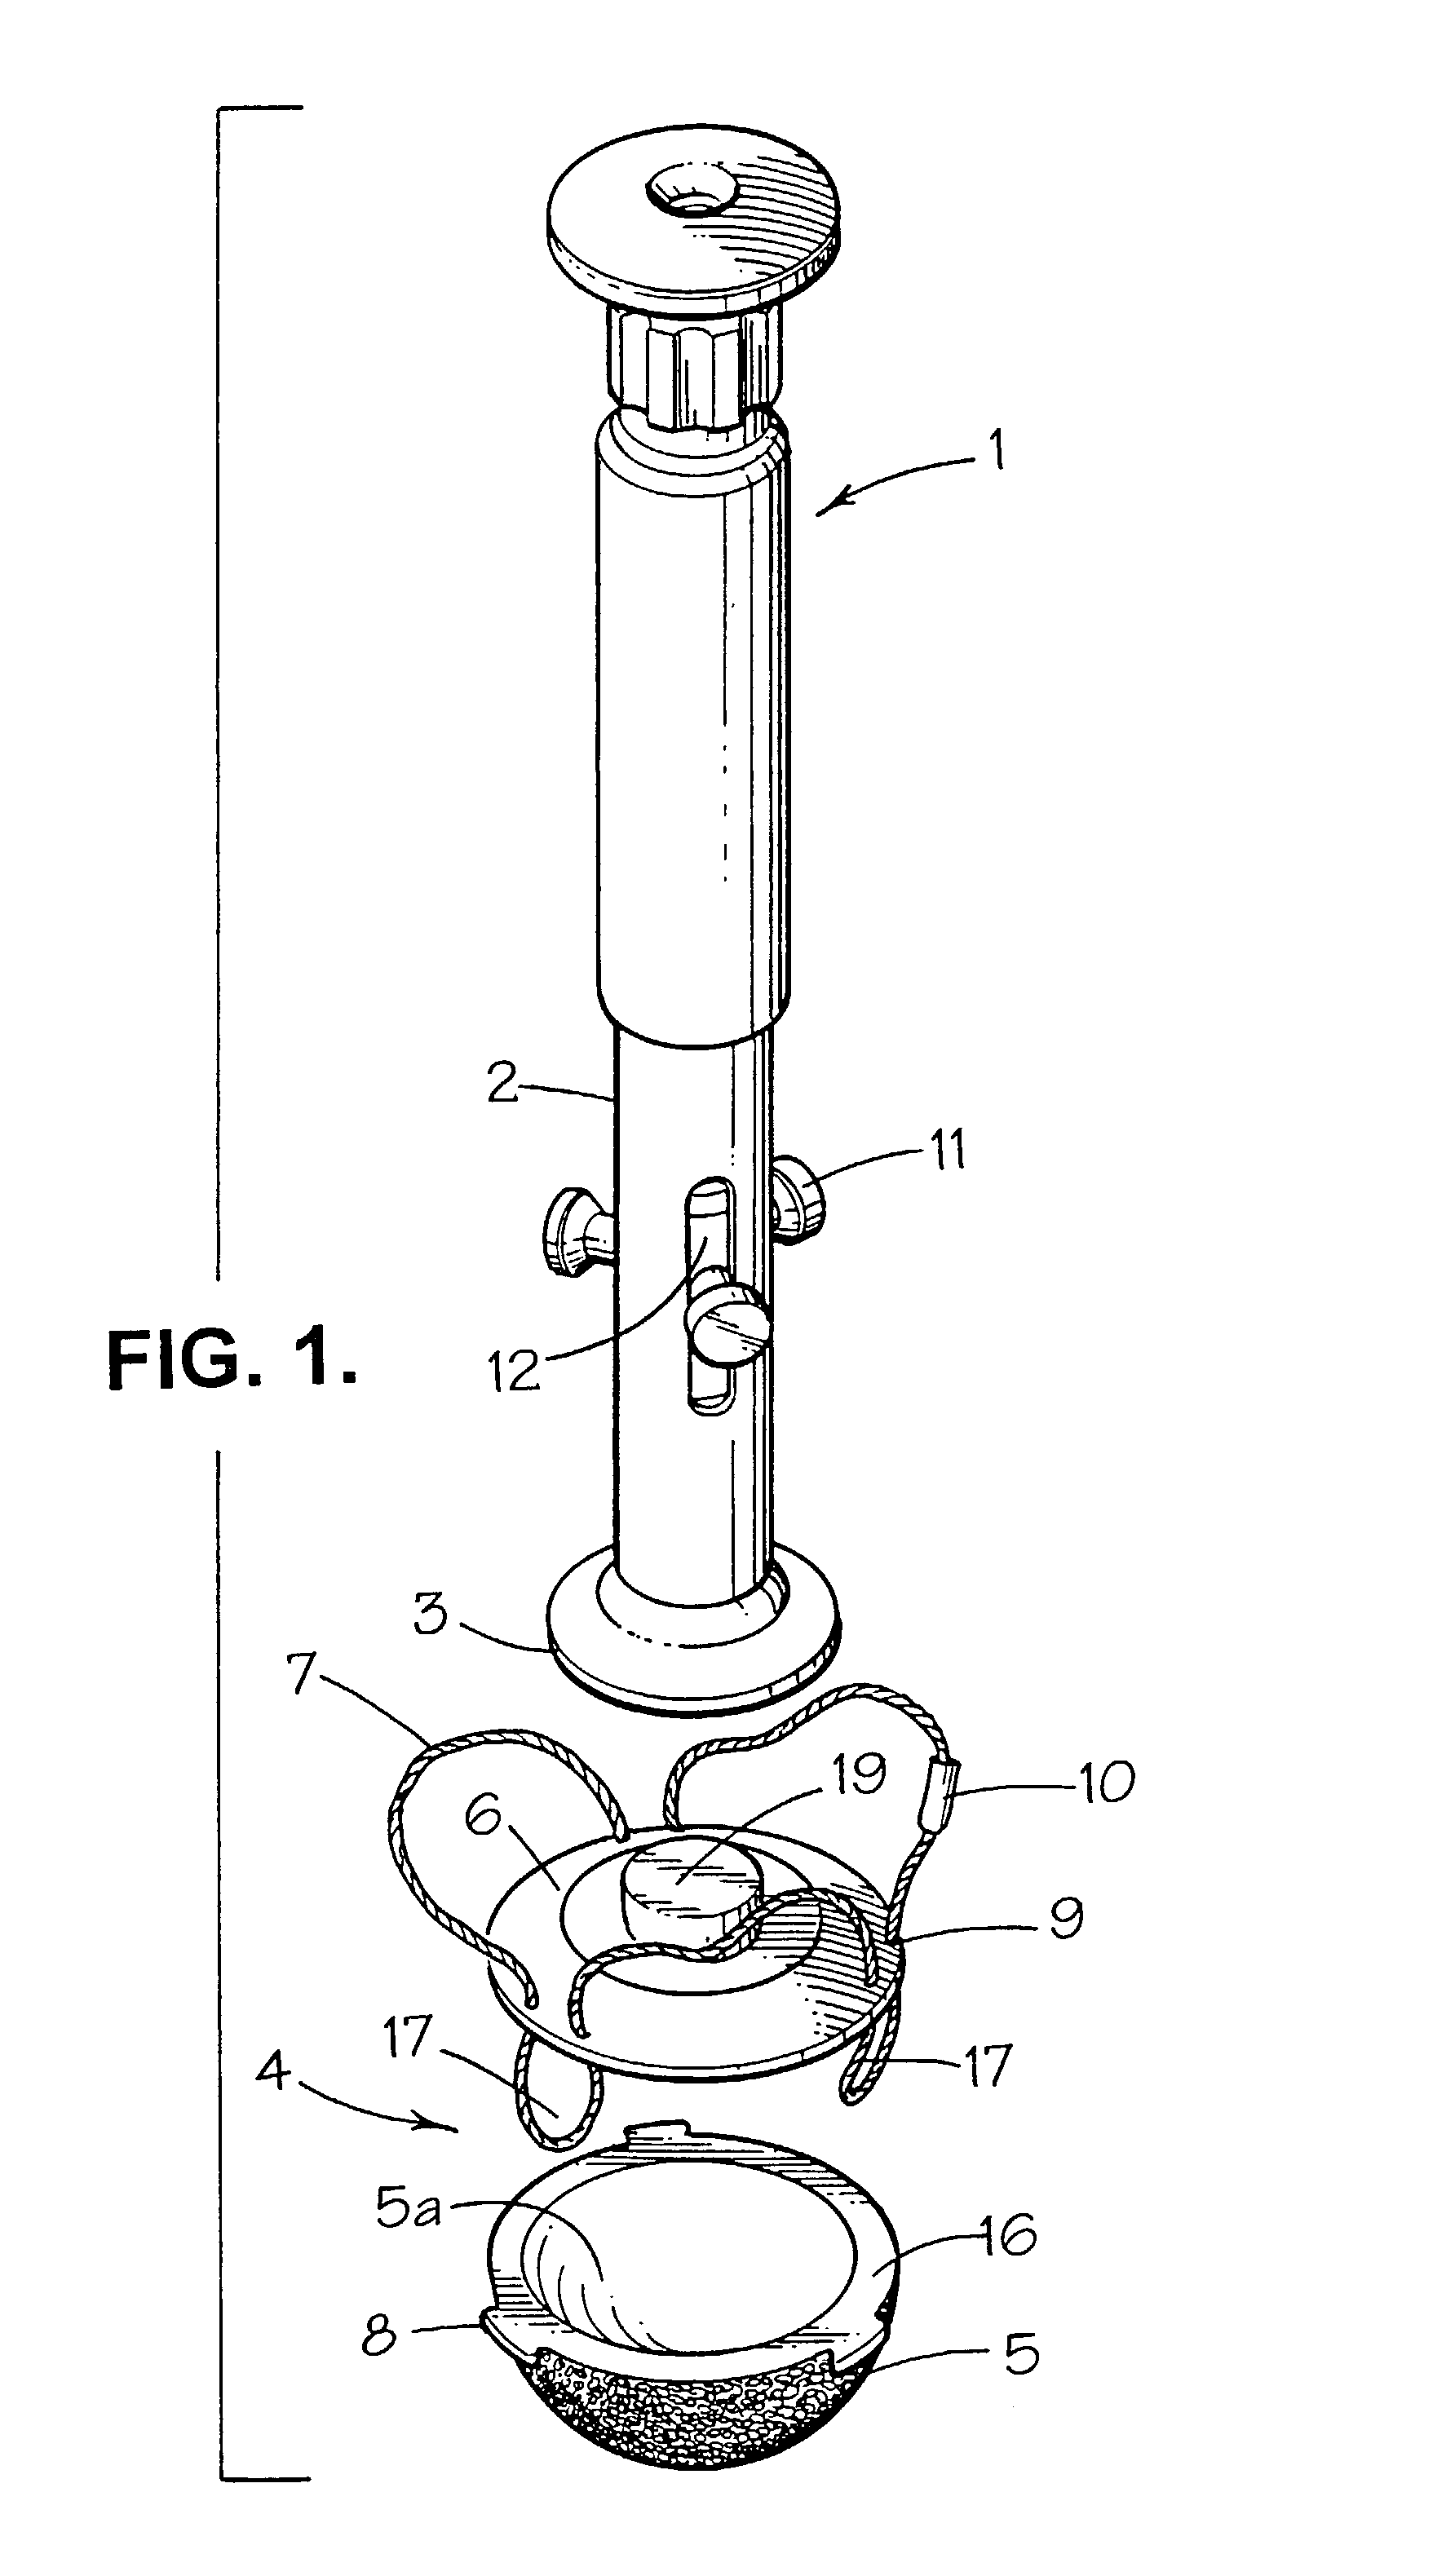 Prosthetic implant and surgical tool